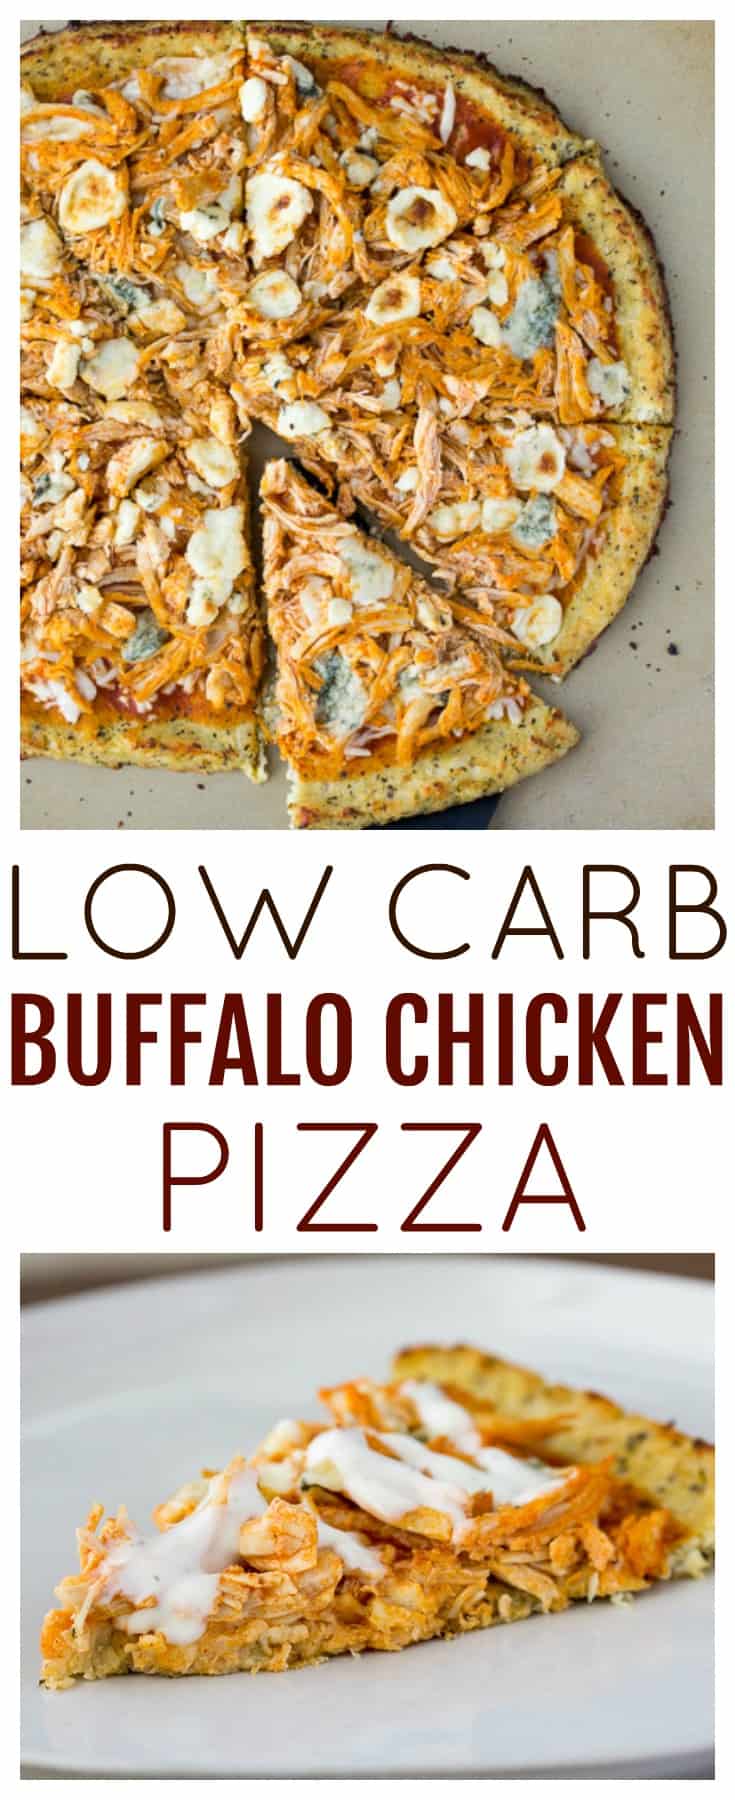 This Low Carb Buffalo Chicken Pizza recipe is loaded with flavor and filling! It's also a naturally gluten free recipe! | #dlbrecipes #pizza #cauliflowerpizza #buffalochicken #glutenfree #lowcarb